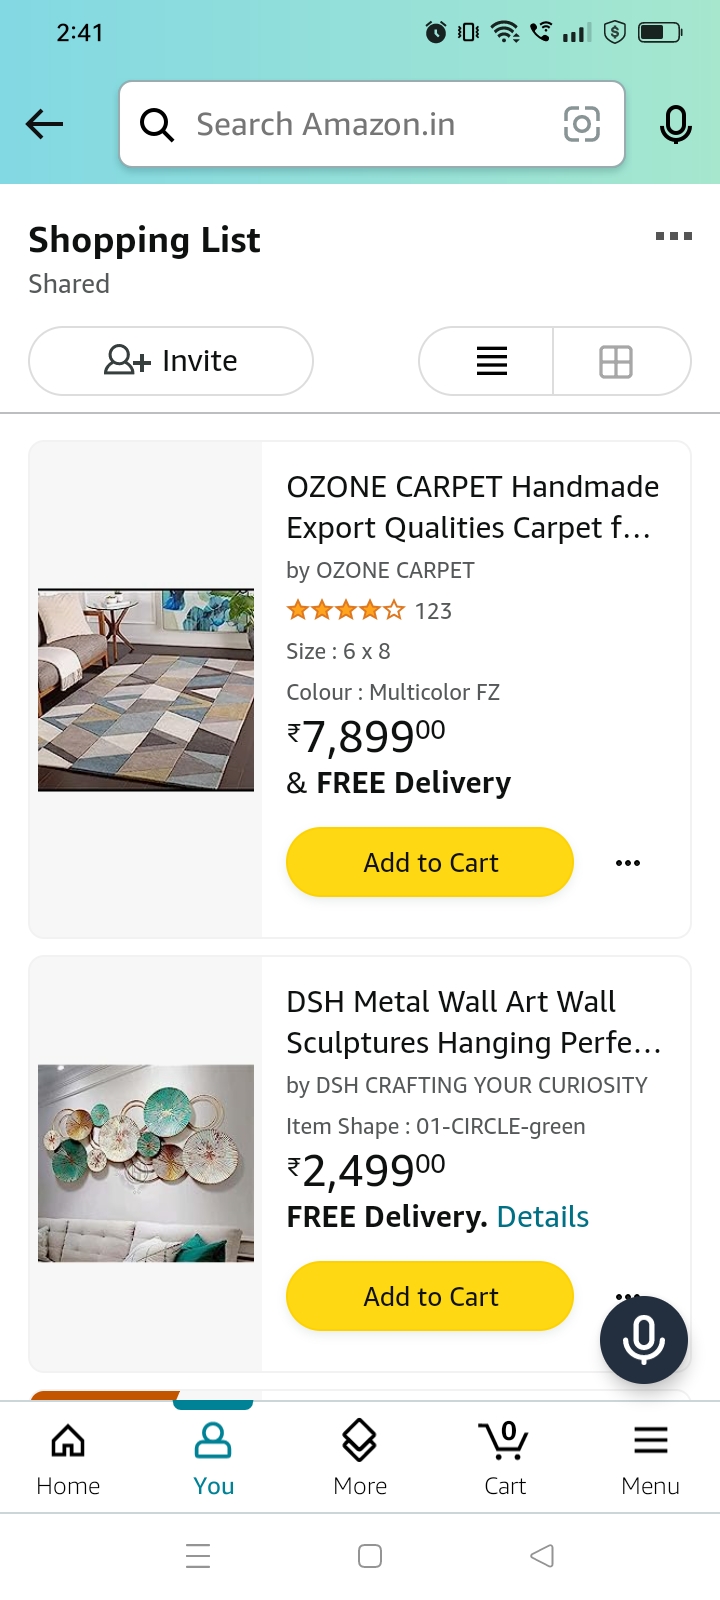 Amazon Shopping list page
